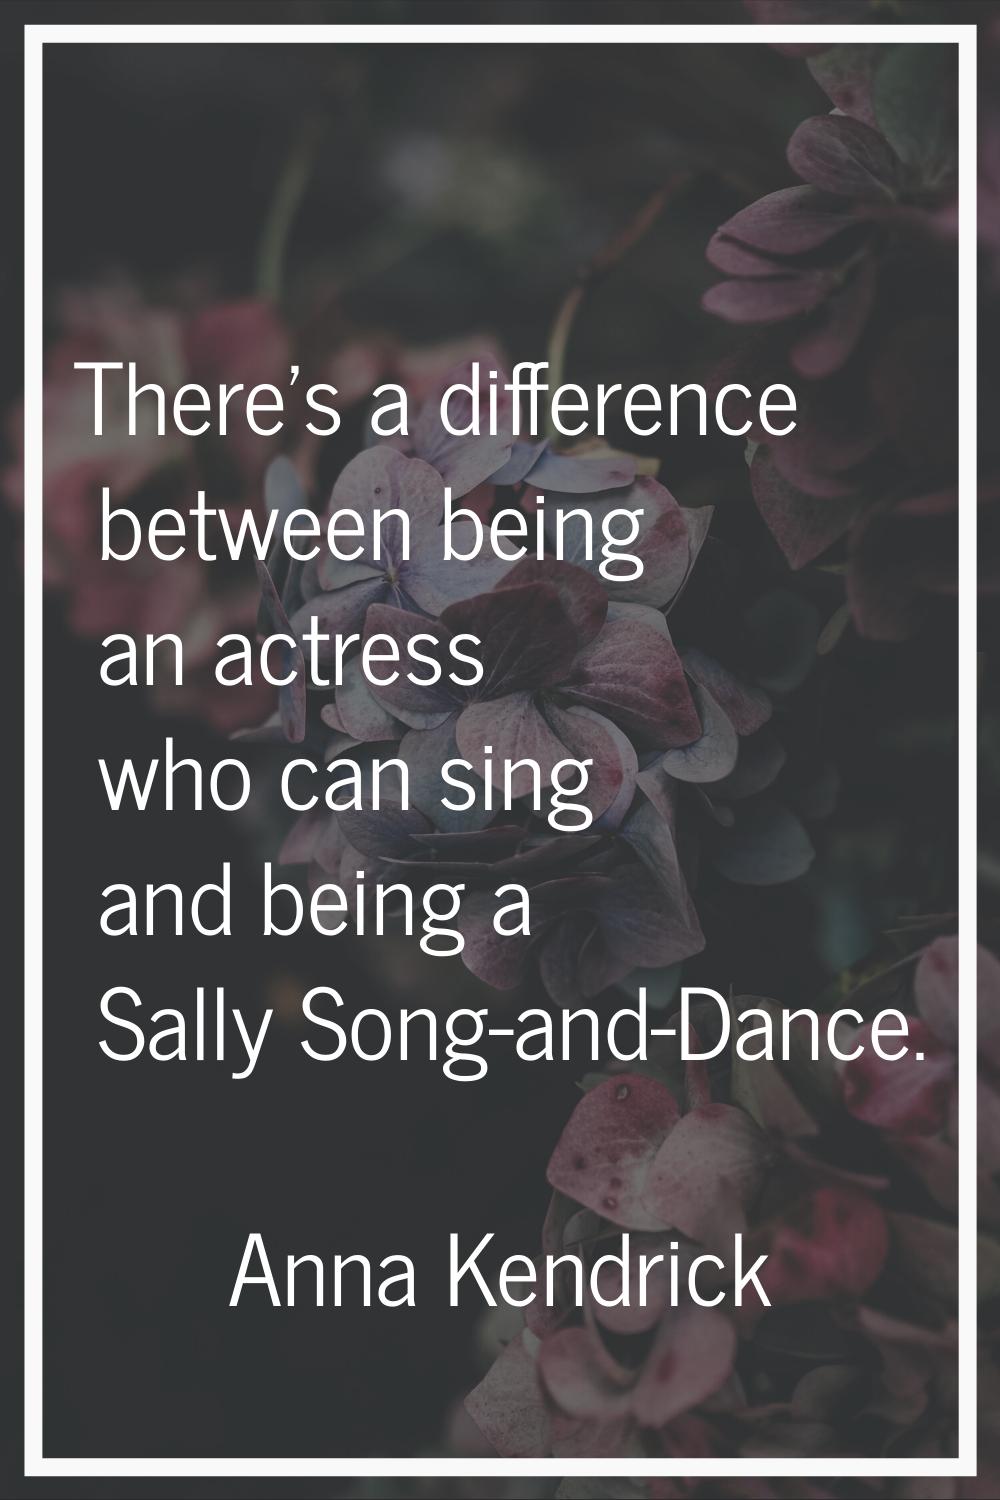 There's a difference between being an actress who can sing and being a Sally Song-and-Dance.